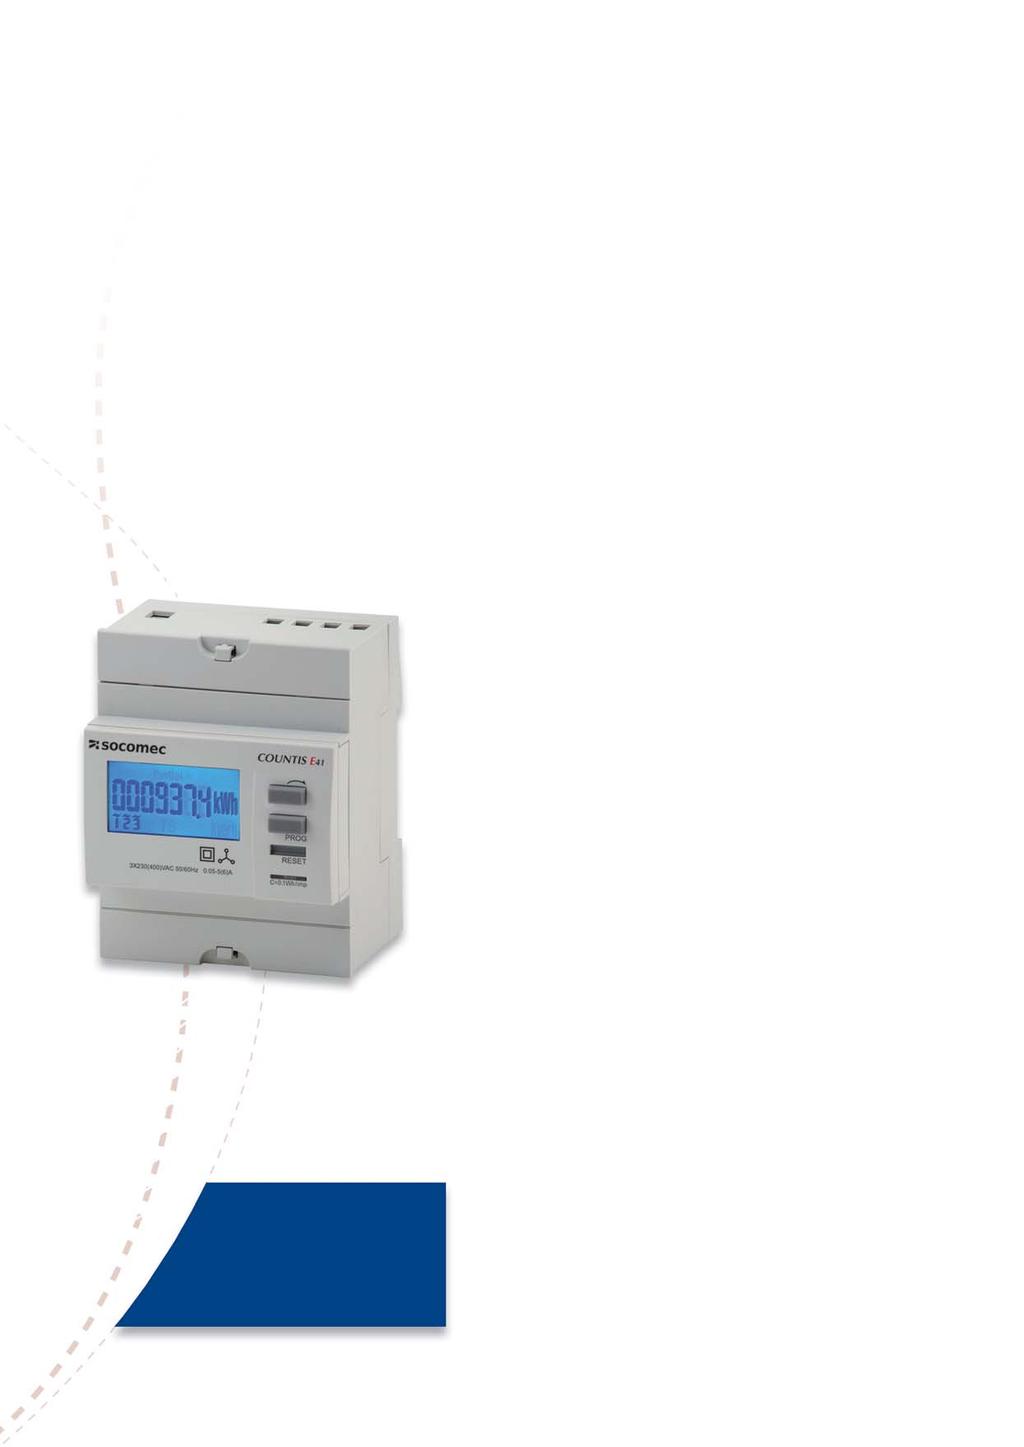 Countis Energy Metering Type Connection Max Rating kwh Metering Three Phase Direct 63A Features: - Direct connect three-phase kwh meter up to 63 Amps (3ph; 3ph + N). - Class 1 to IEC 62053-21.